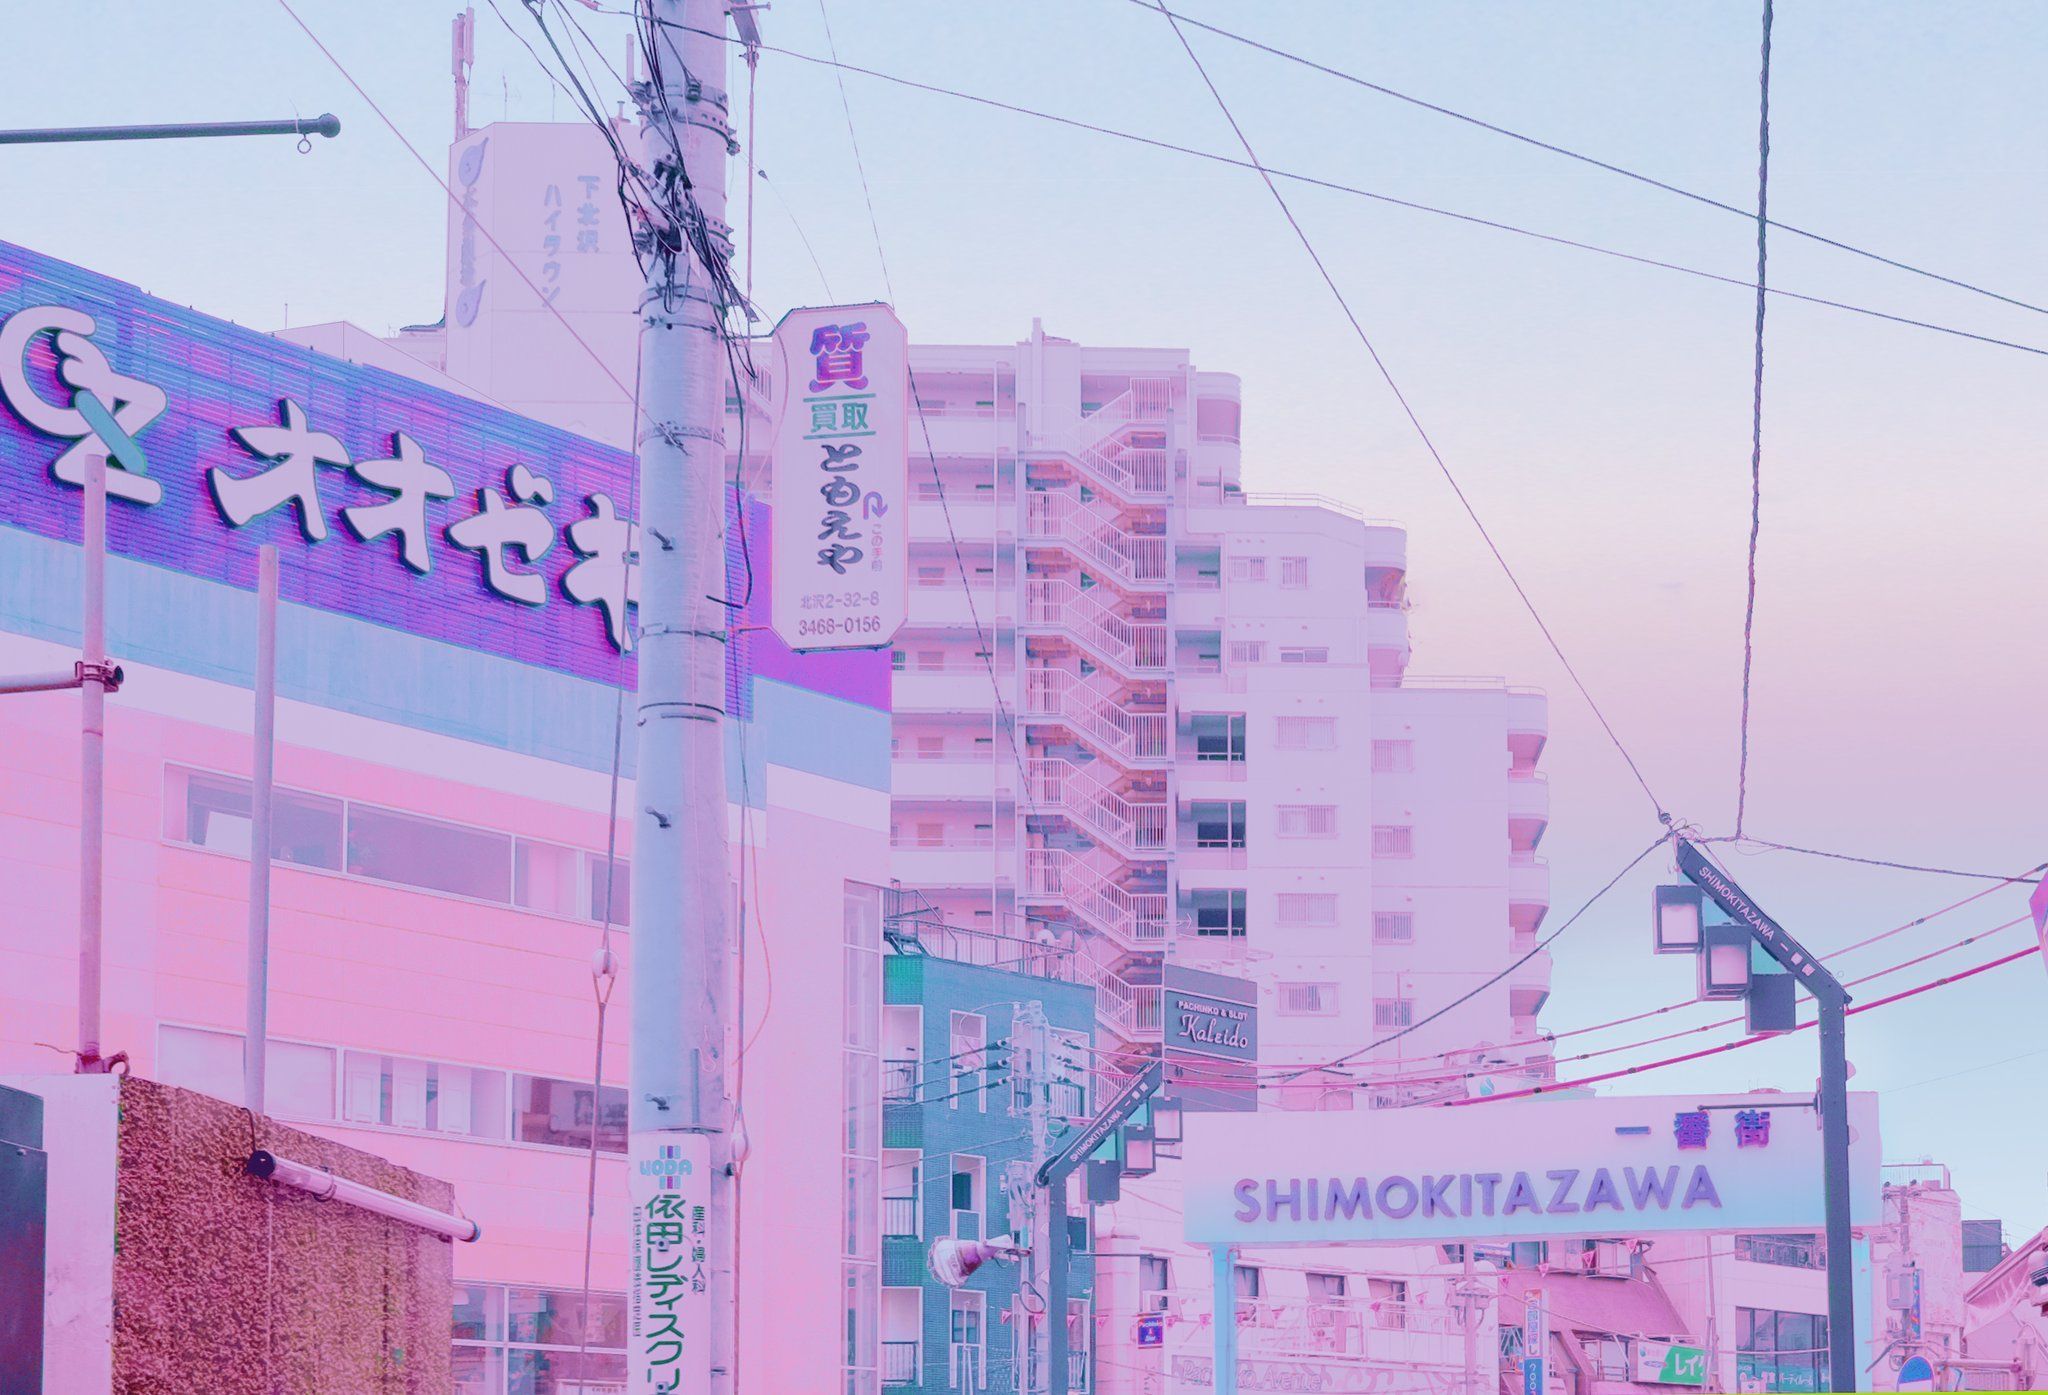 Pink Japanese Aesthetic Wallpapers